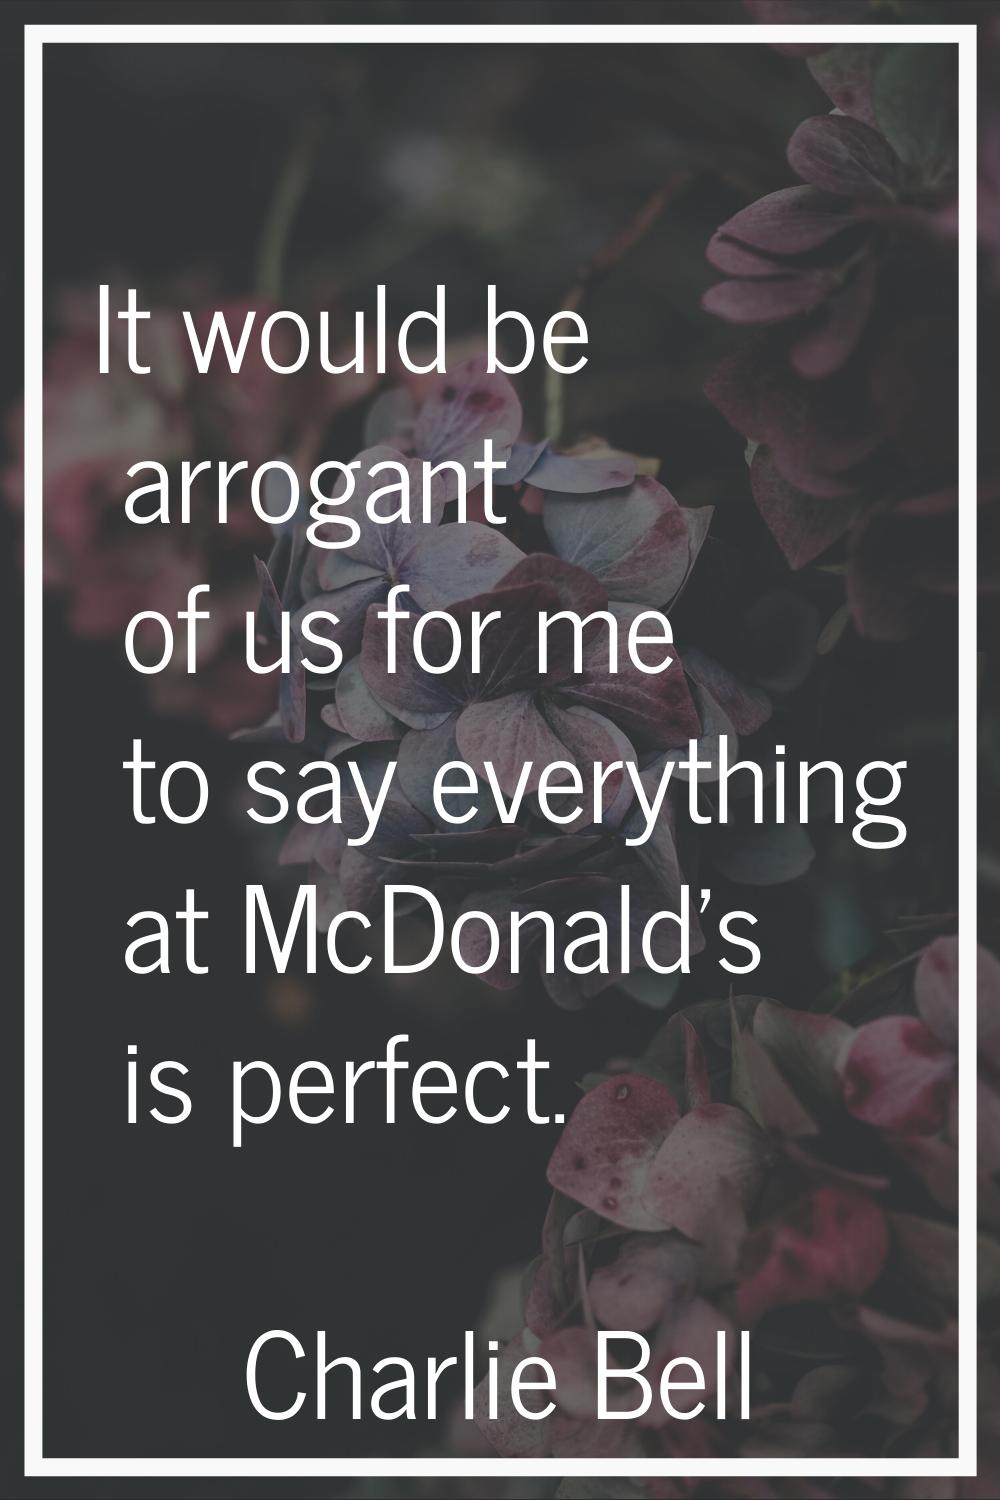 It would be arrogant of us for me to say everything at McDonald's is perfect.